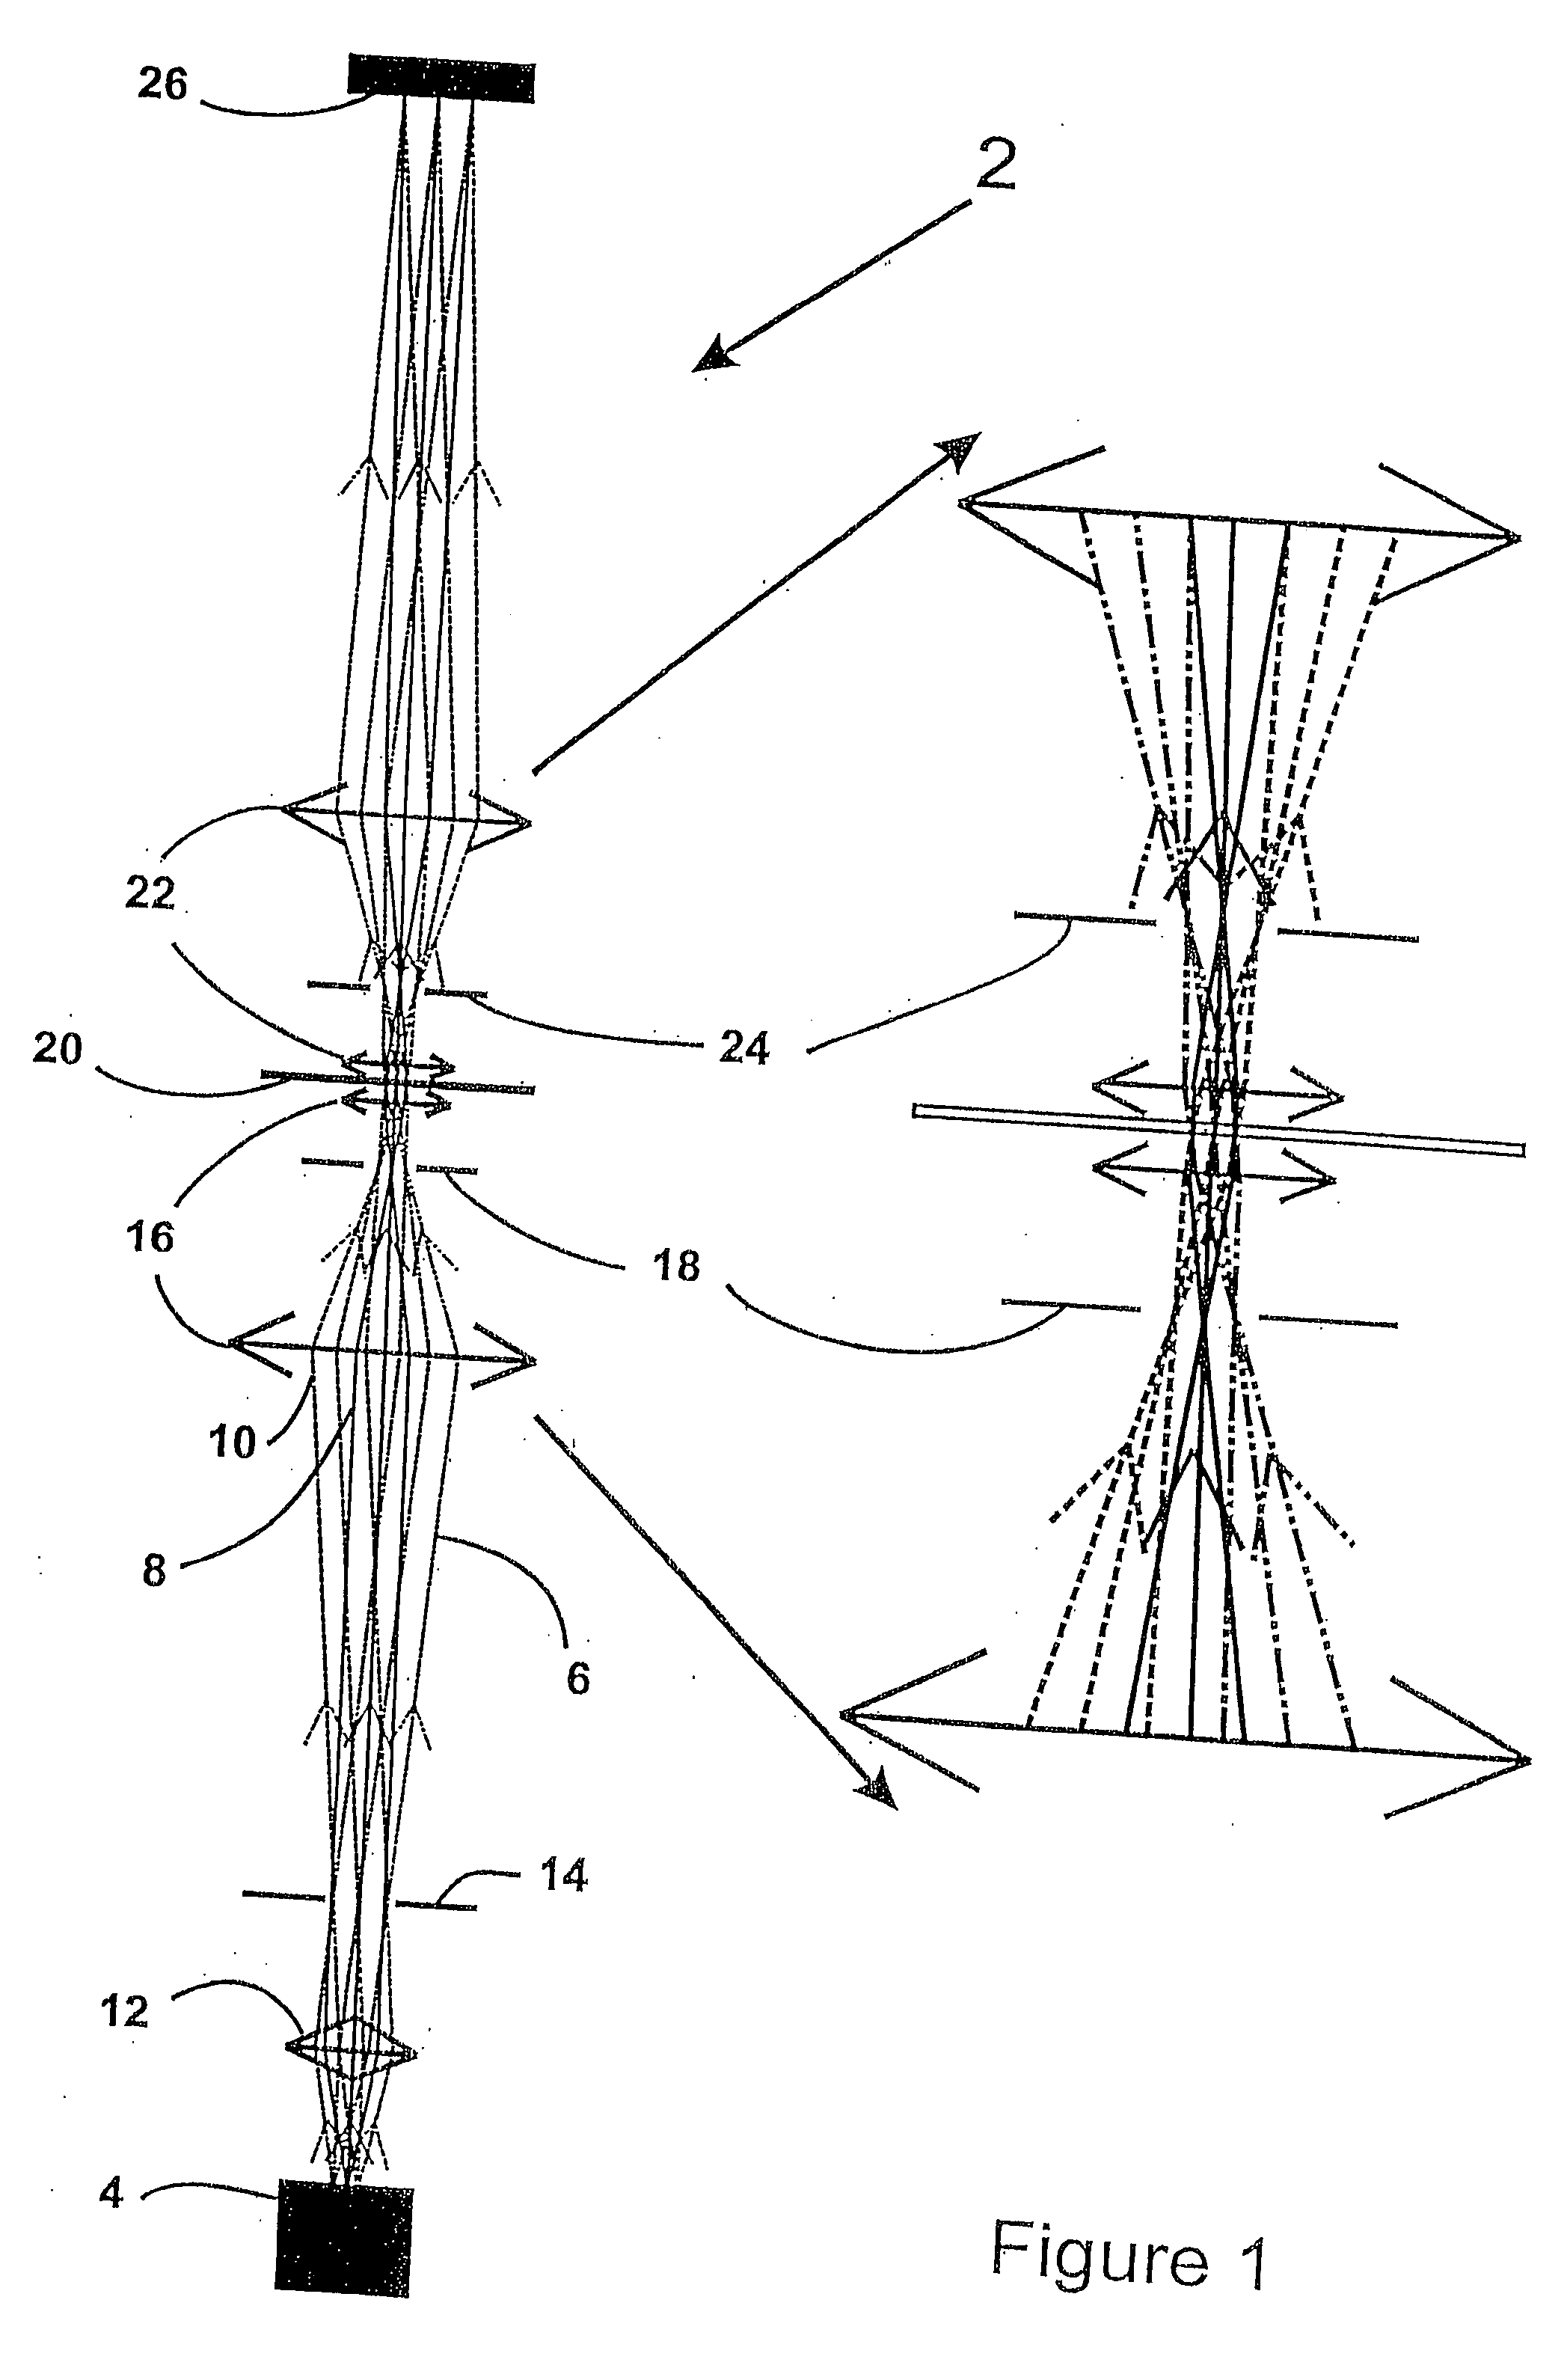 Apparatus and methods relating to spatially light modulated microscopy